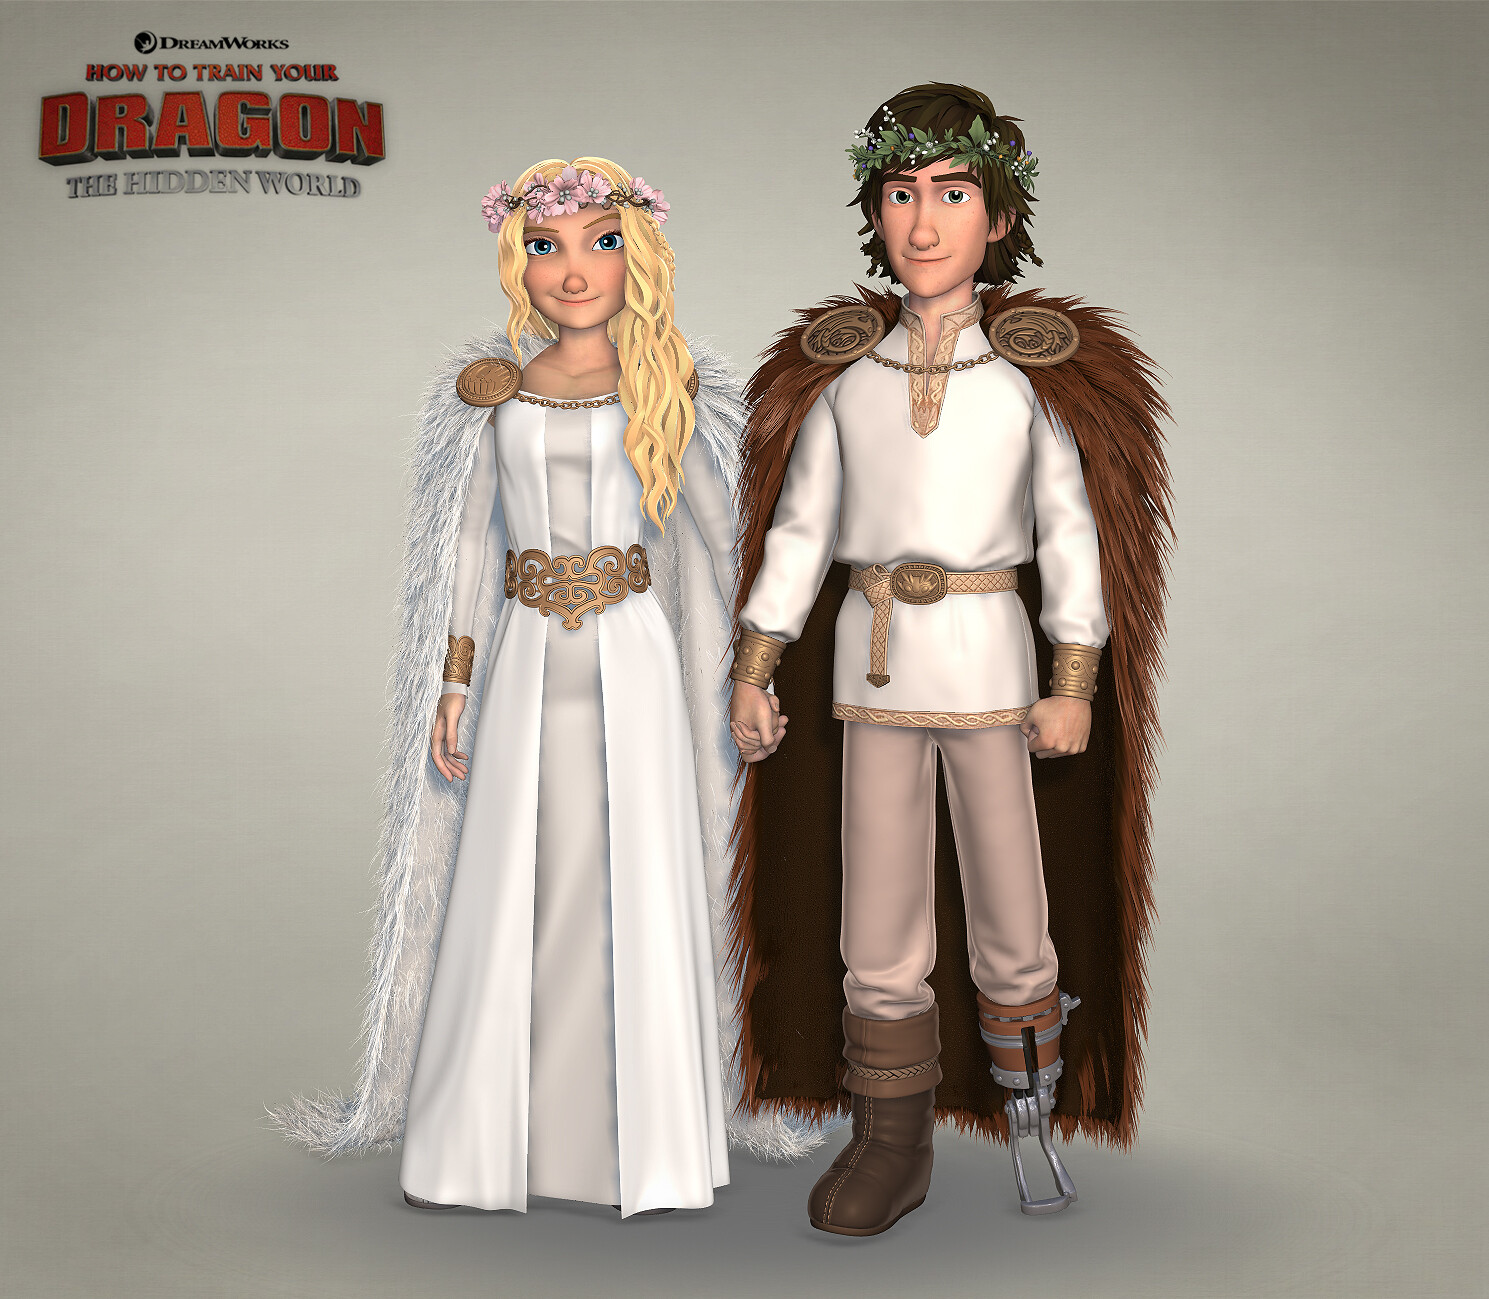 Gallery Wedding of Astrid Hofferson and Hiccup Horrendous Haddock ...